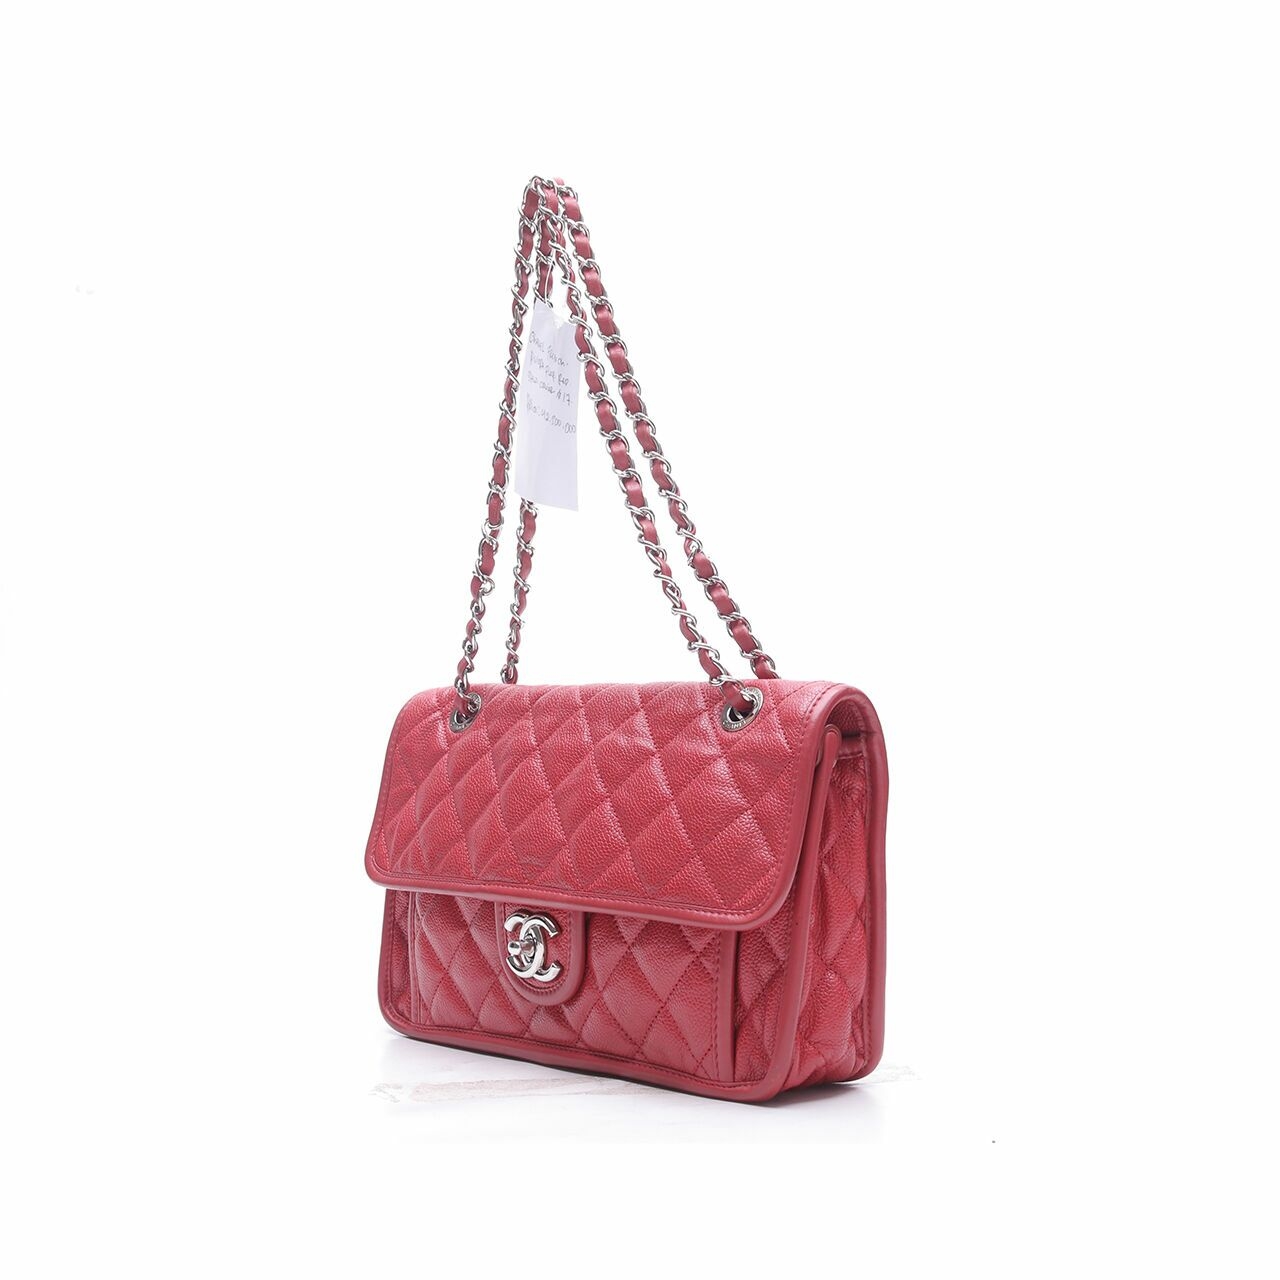 Chanel Caviar Quilted French Riviera Flap Red Shoulder Bag